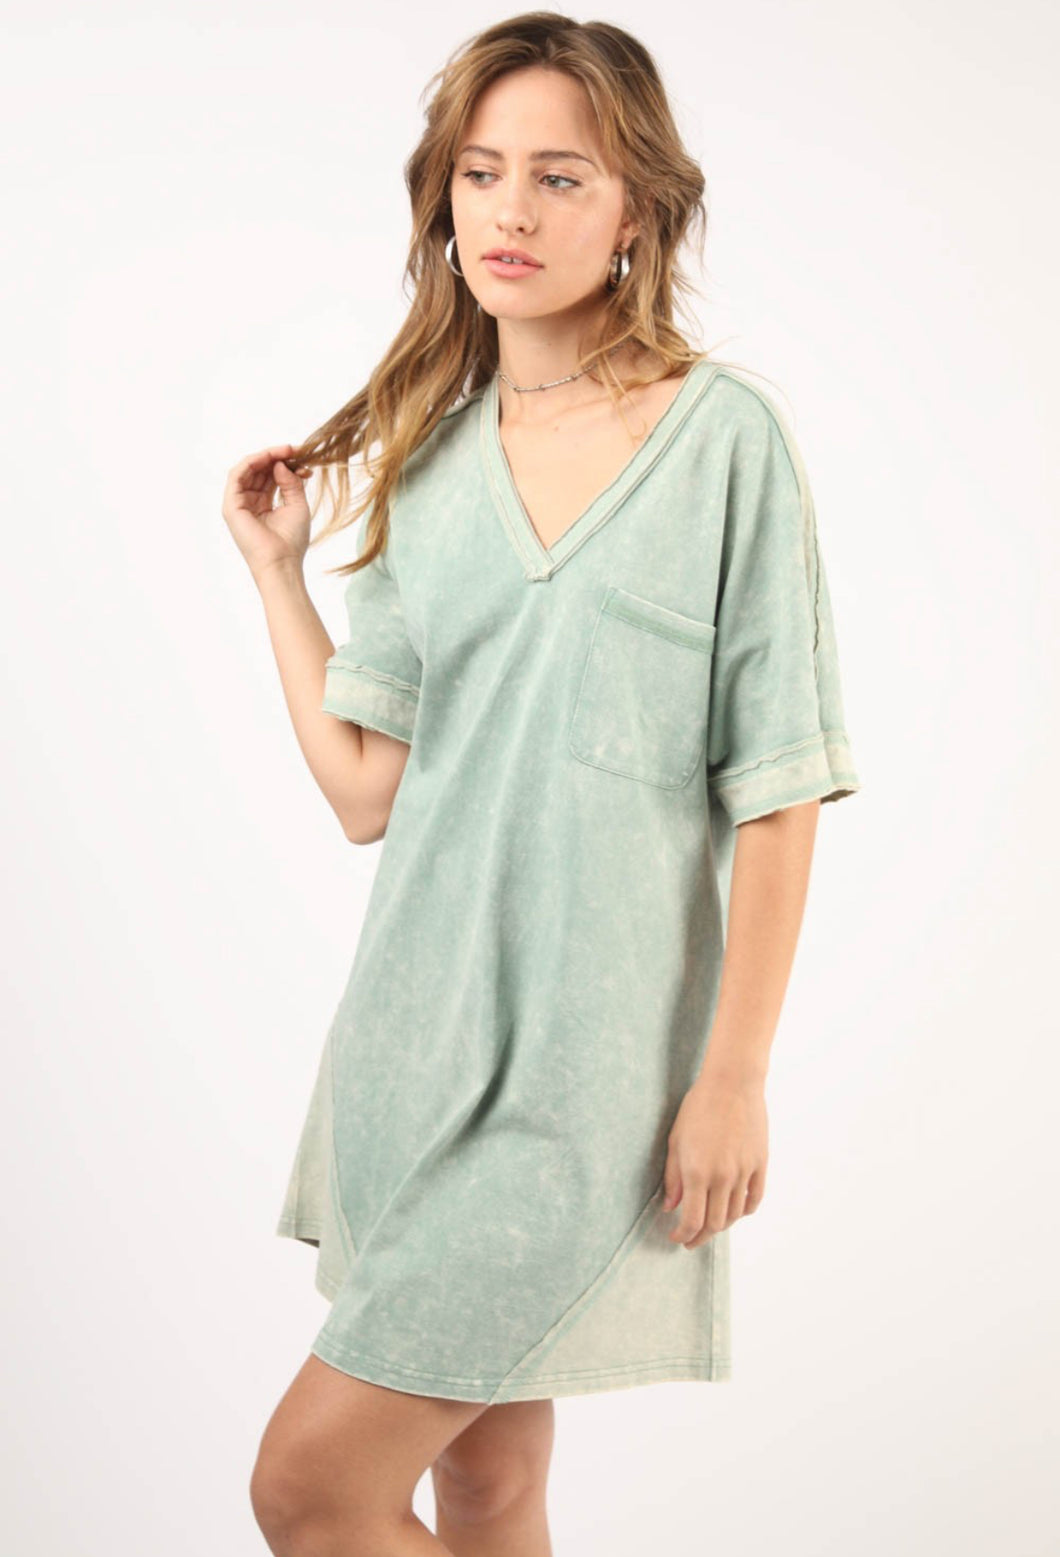 You’re every day not so basic tee shirt dress - sage